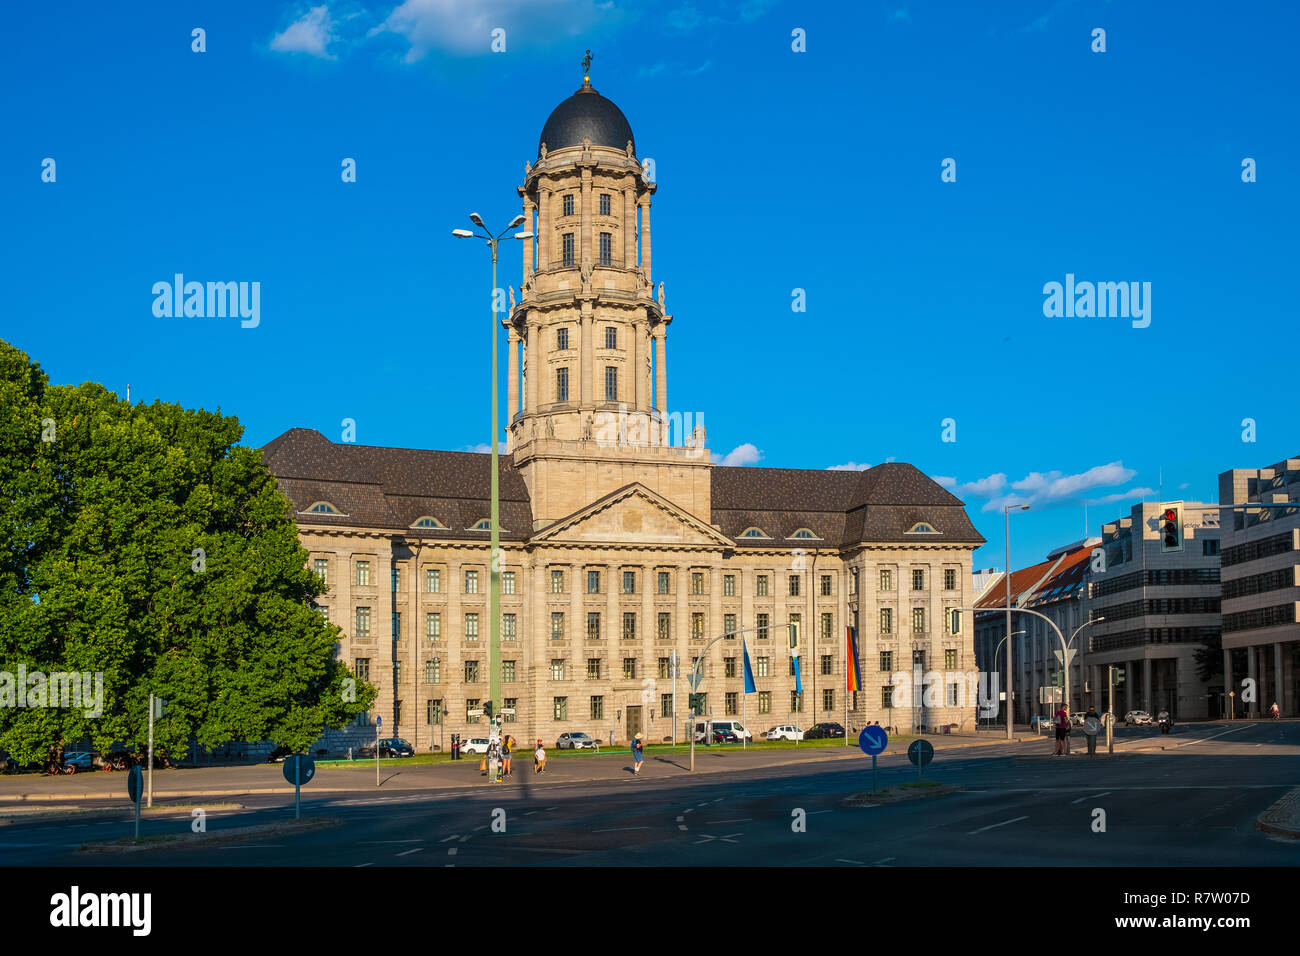 Berlin, Berlin state / Germany - 2018/07/24: Historic Old City Hall building - Altes Stadthaus - serving as a seat of Senate, in the Mitte quarter of  Stock Photo